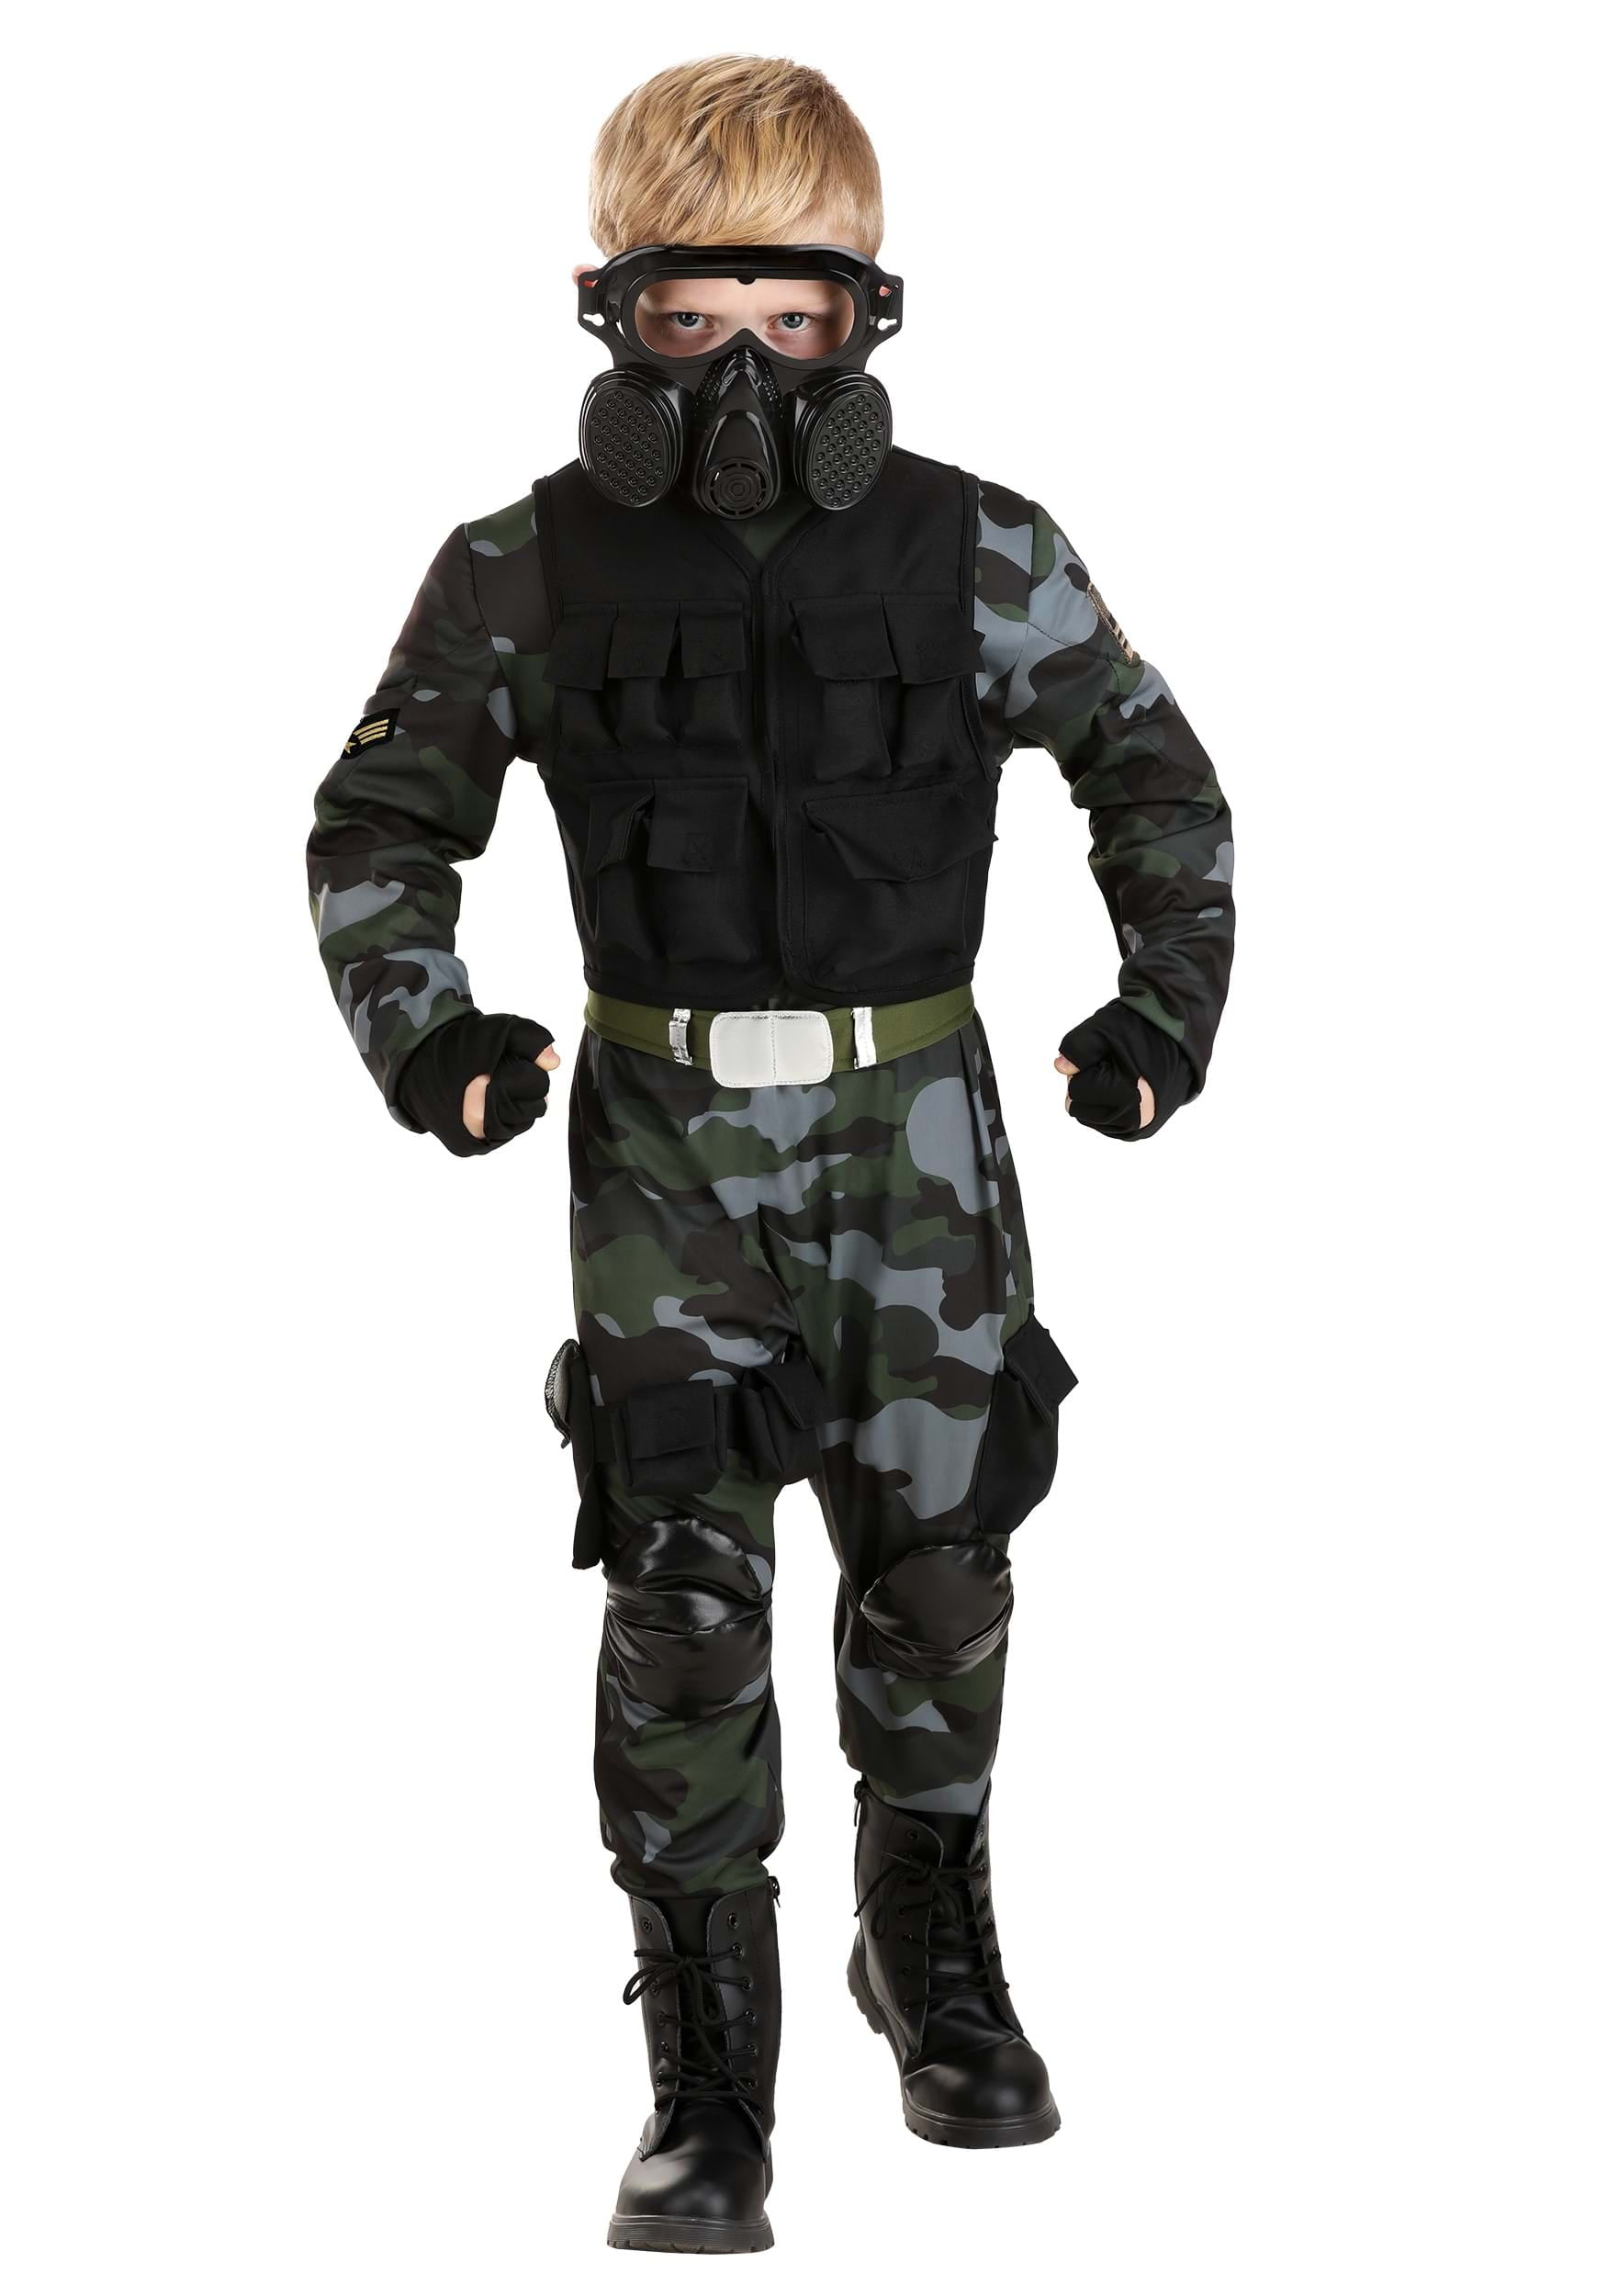 Kid's Special Ops Hammer Soldier Costume 